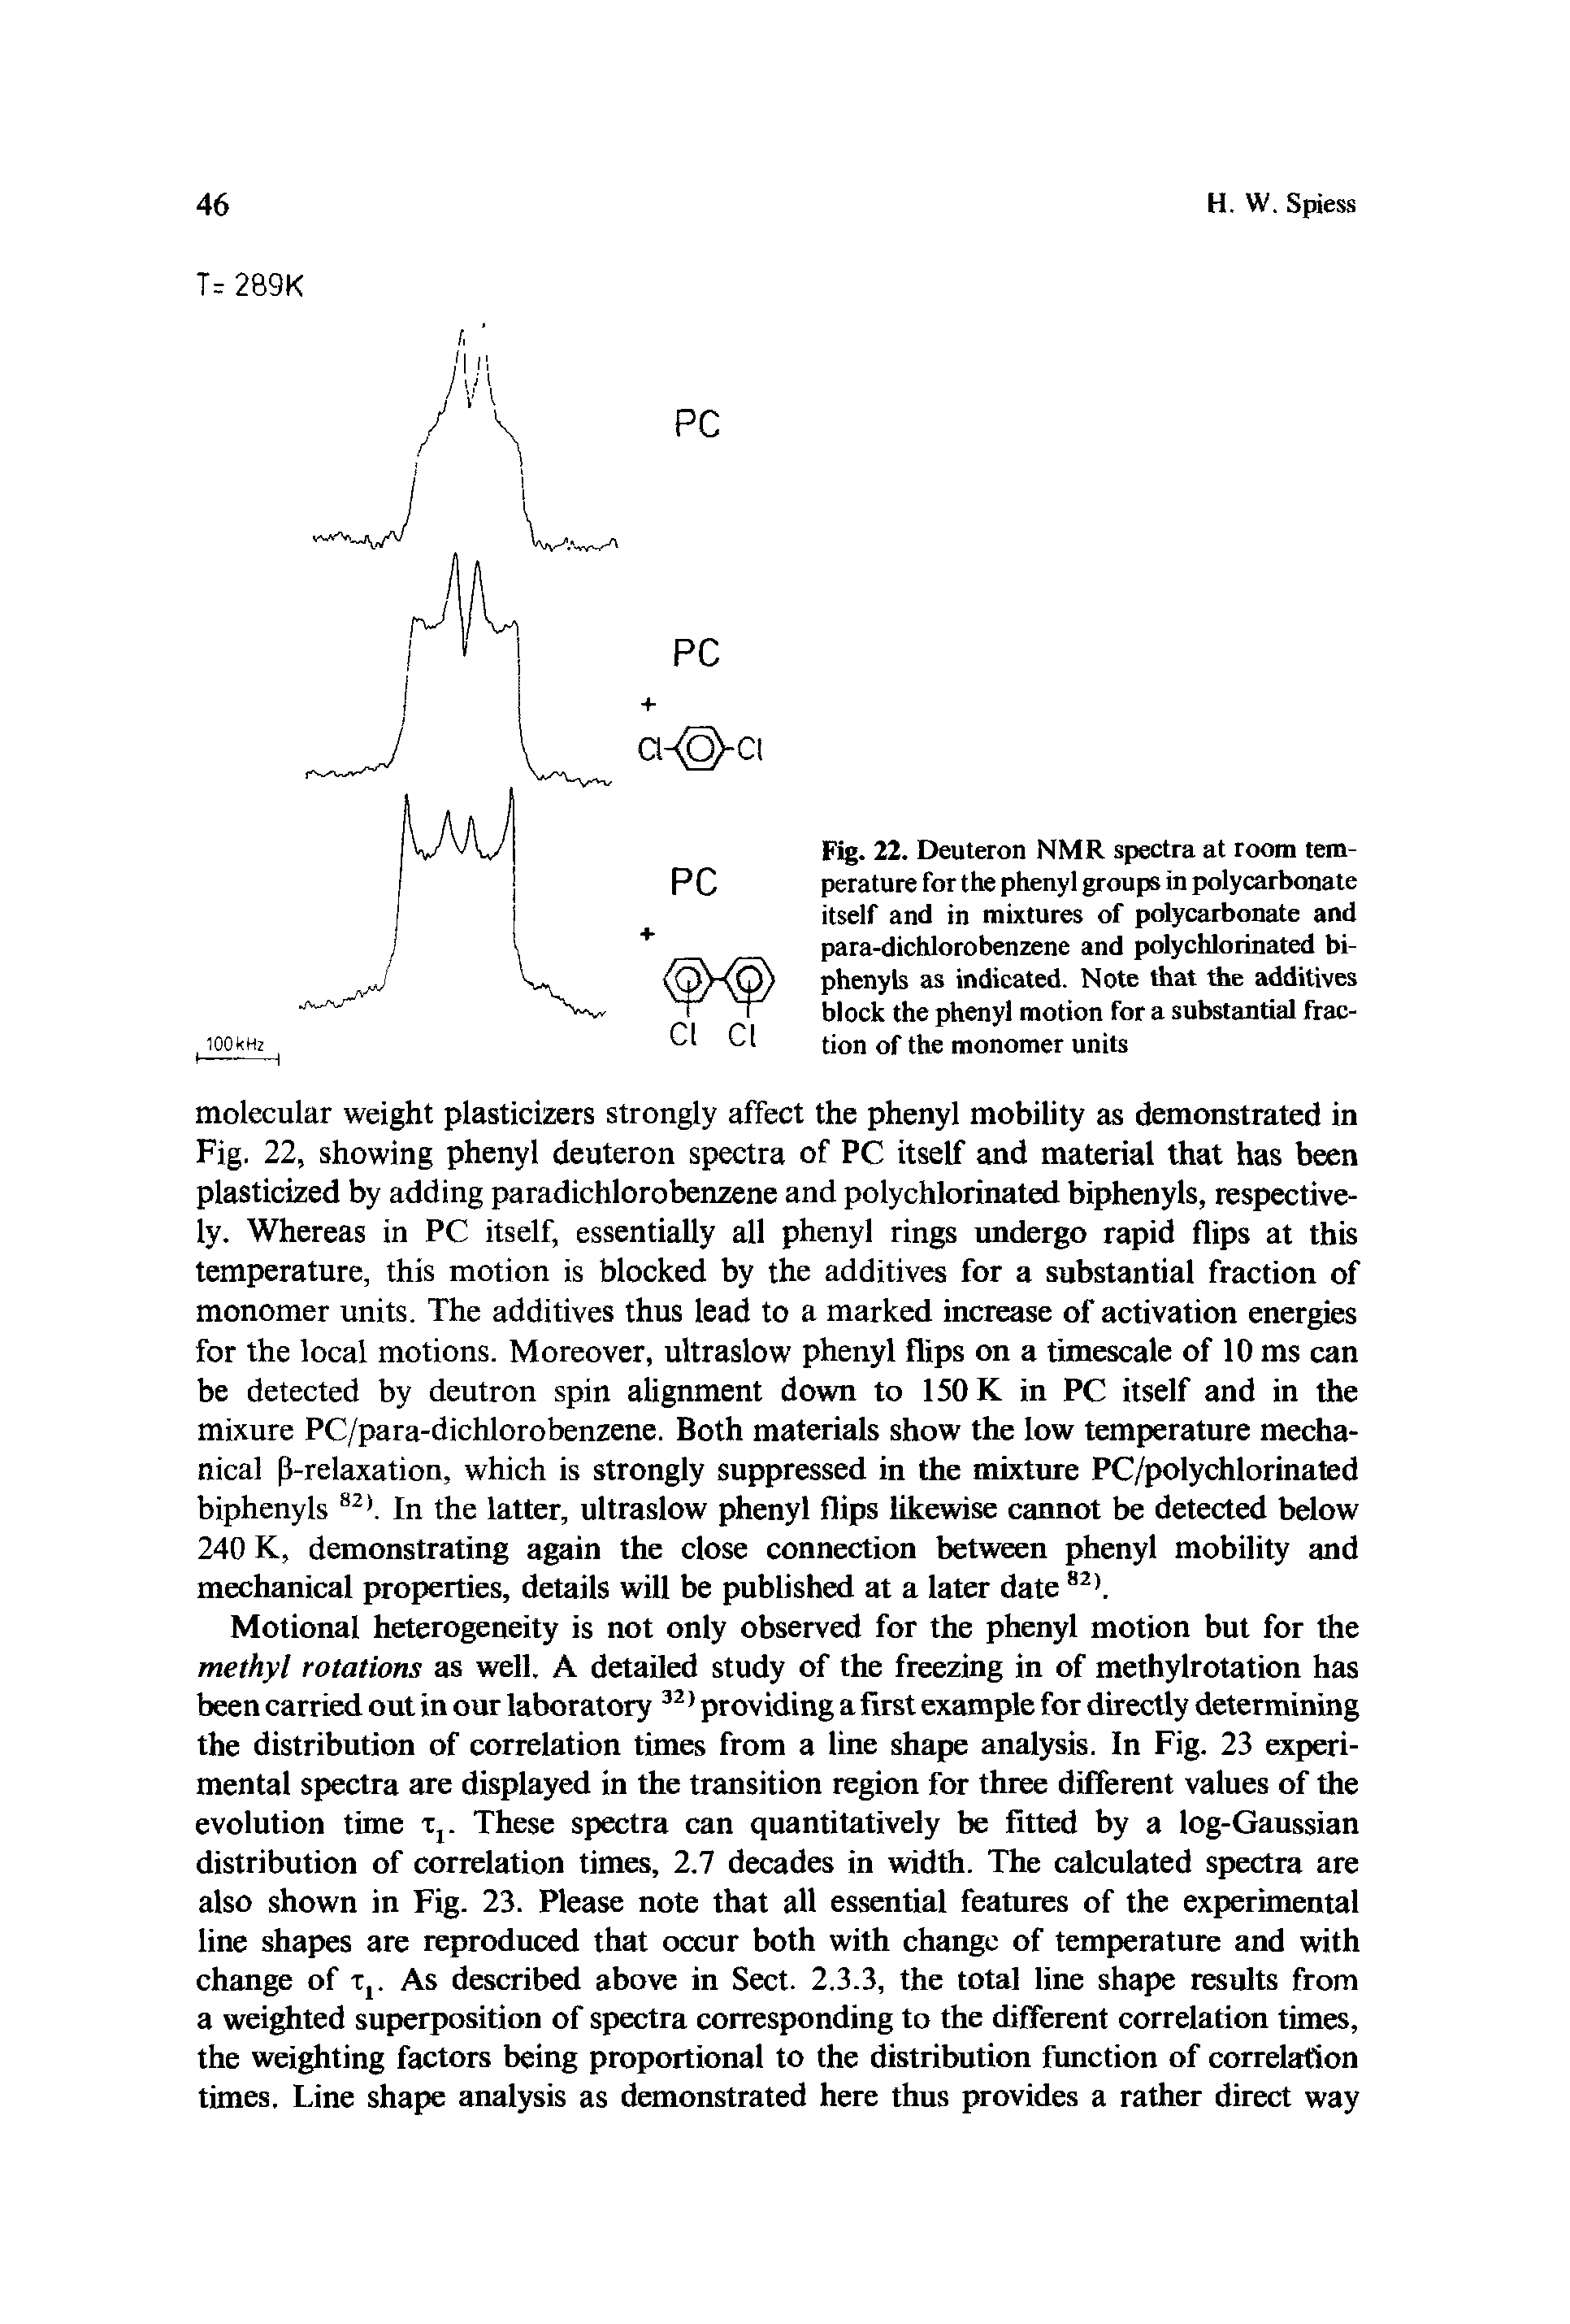 Fig. 22. Deuteron NMR spectra at room temperature for the phenyl groups in polycarbonate itself and in mixtures of polycarbonate and para-dichlorobenzene and polychlorinated biphenyls as indicated. Note that the additives block the phenyl motion for a substantial fraction of the monomer units...